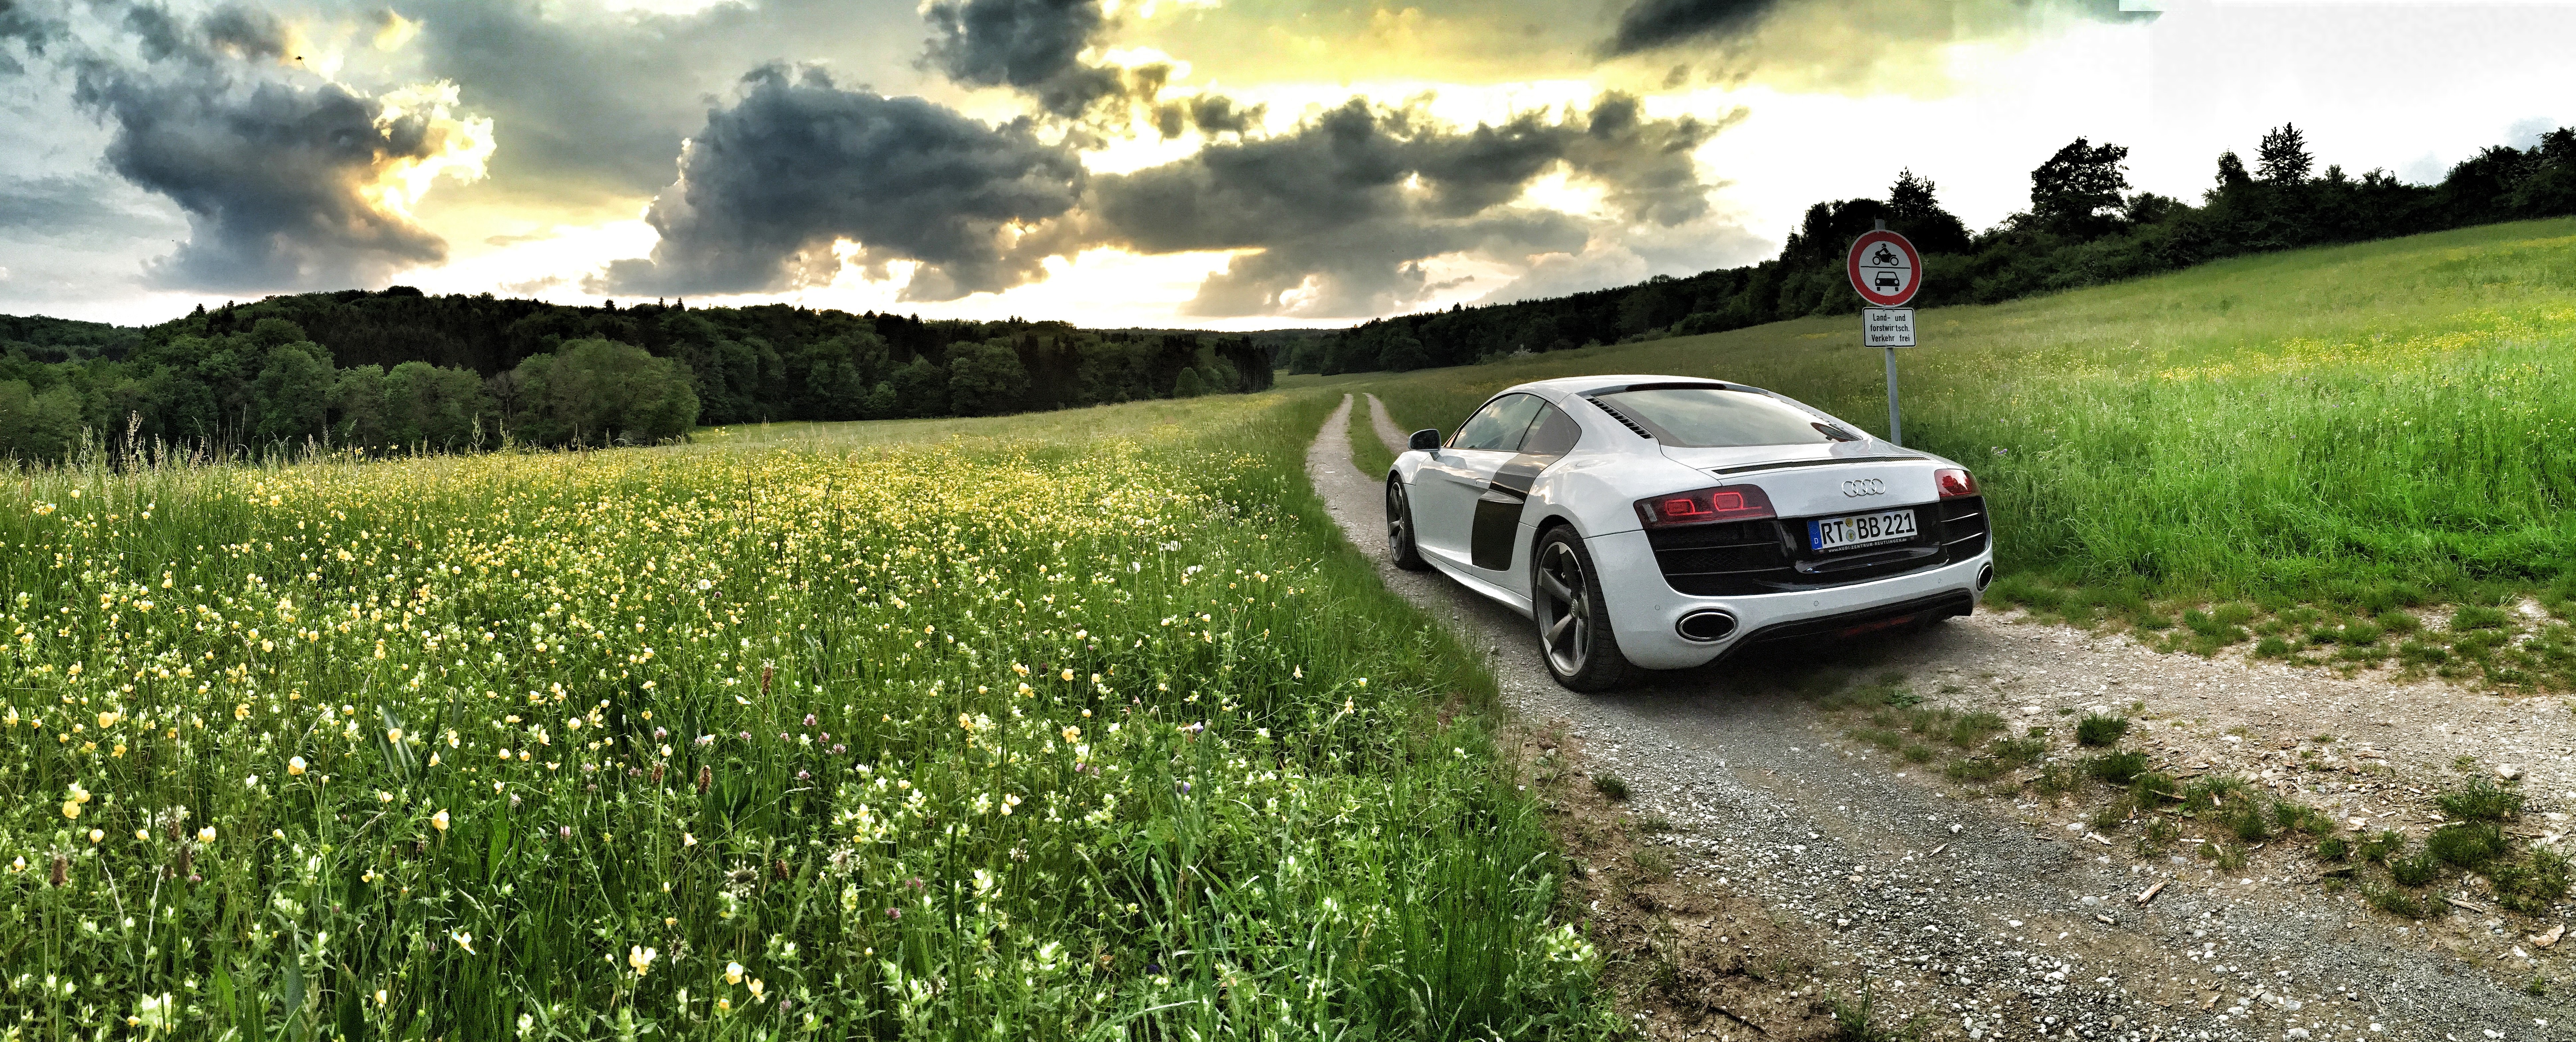 white sports coupe on gray ground surrounded with green fields at daytime